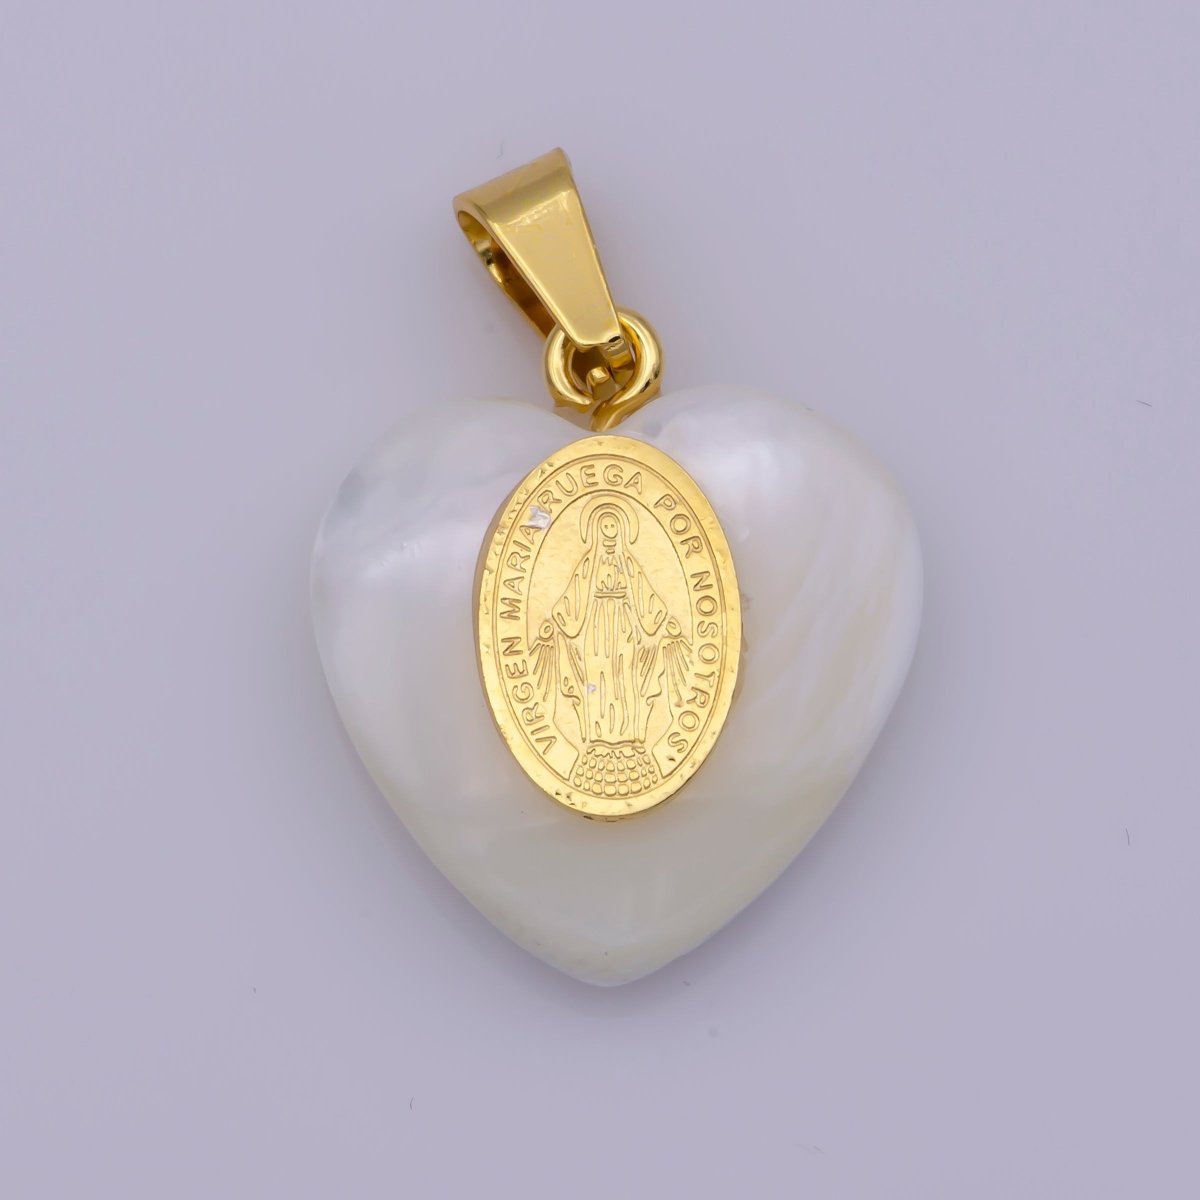 Shell Pearl Our Lady of Guadalupe, Virgin Mary Pendant, Saint Benedict Charm in Heart Pearl Charm for Necklace Making J-522 J-524 J-525 - DLUXCA